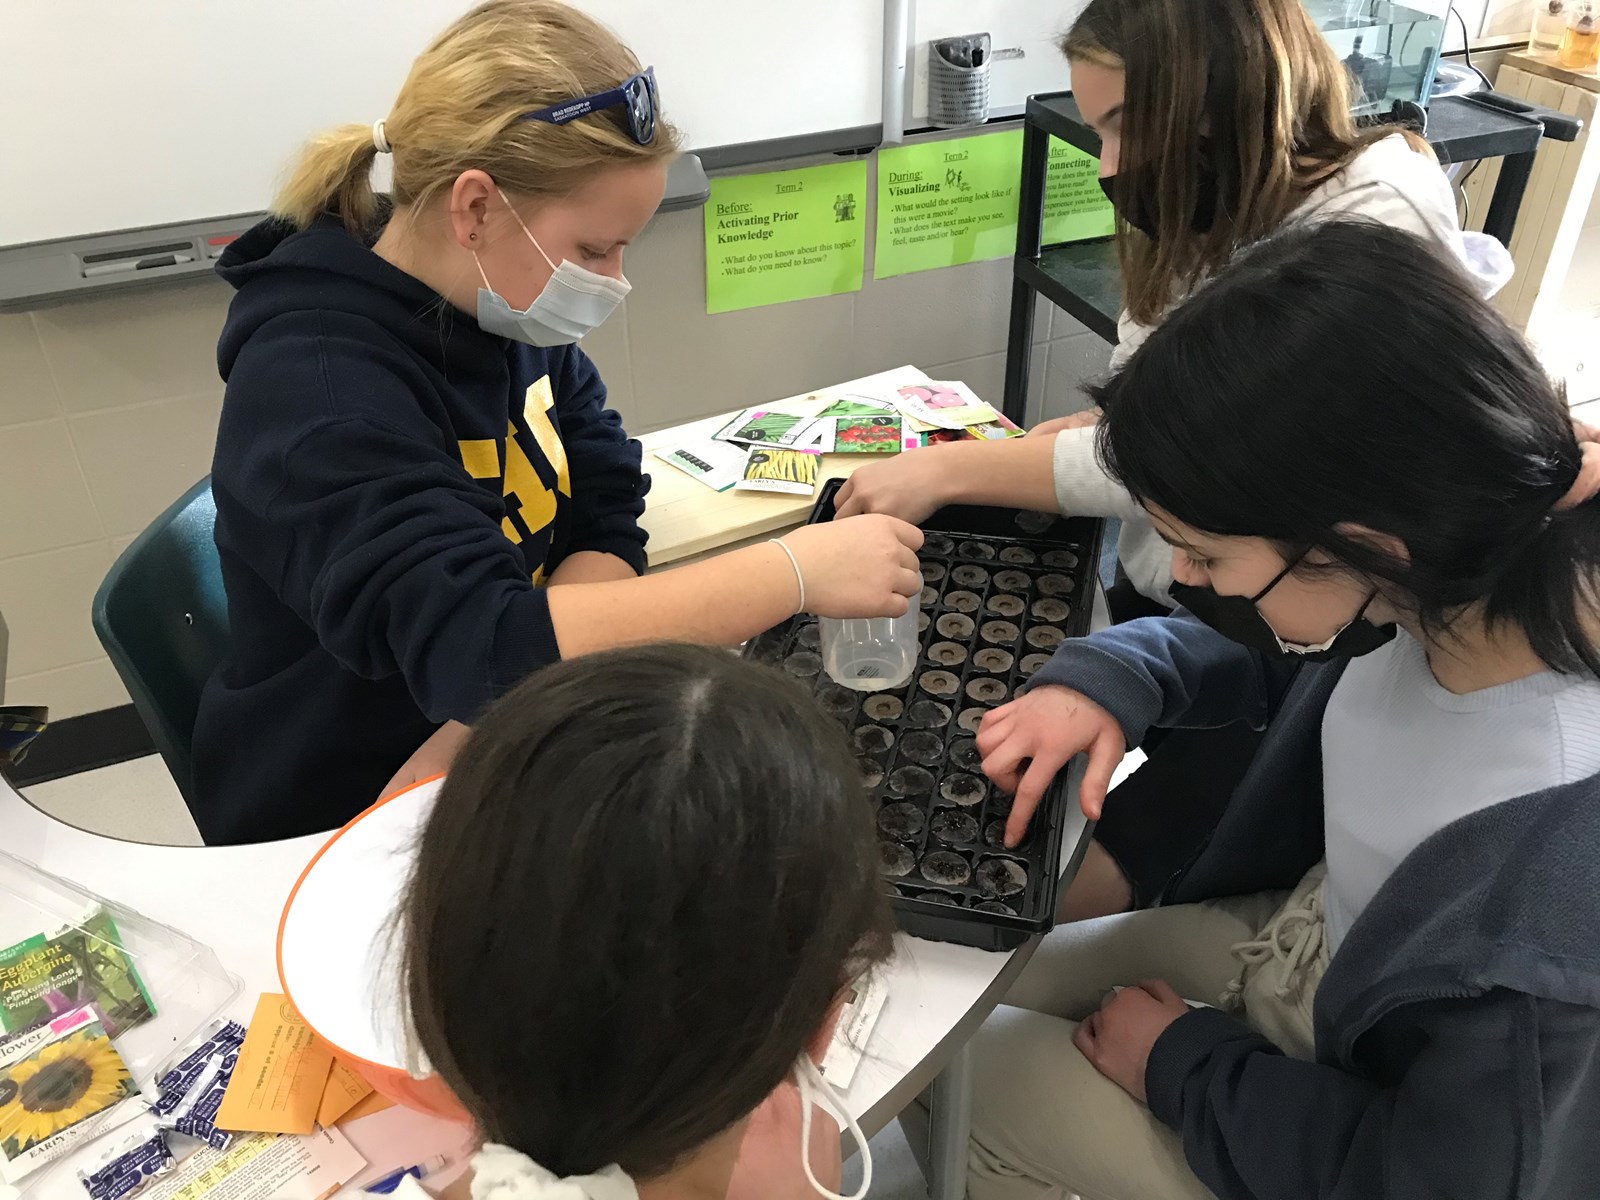 students planting seeds in soil